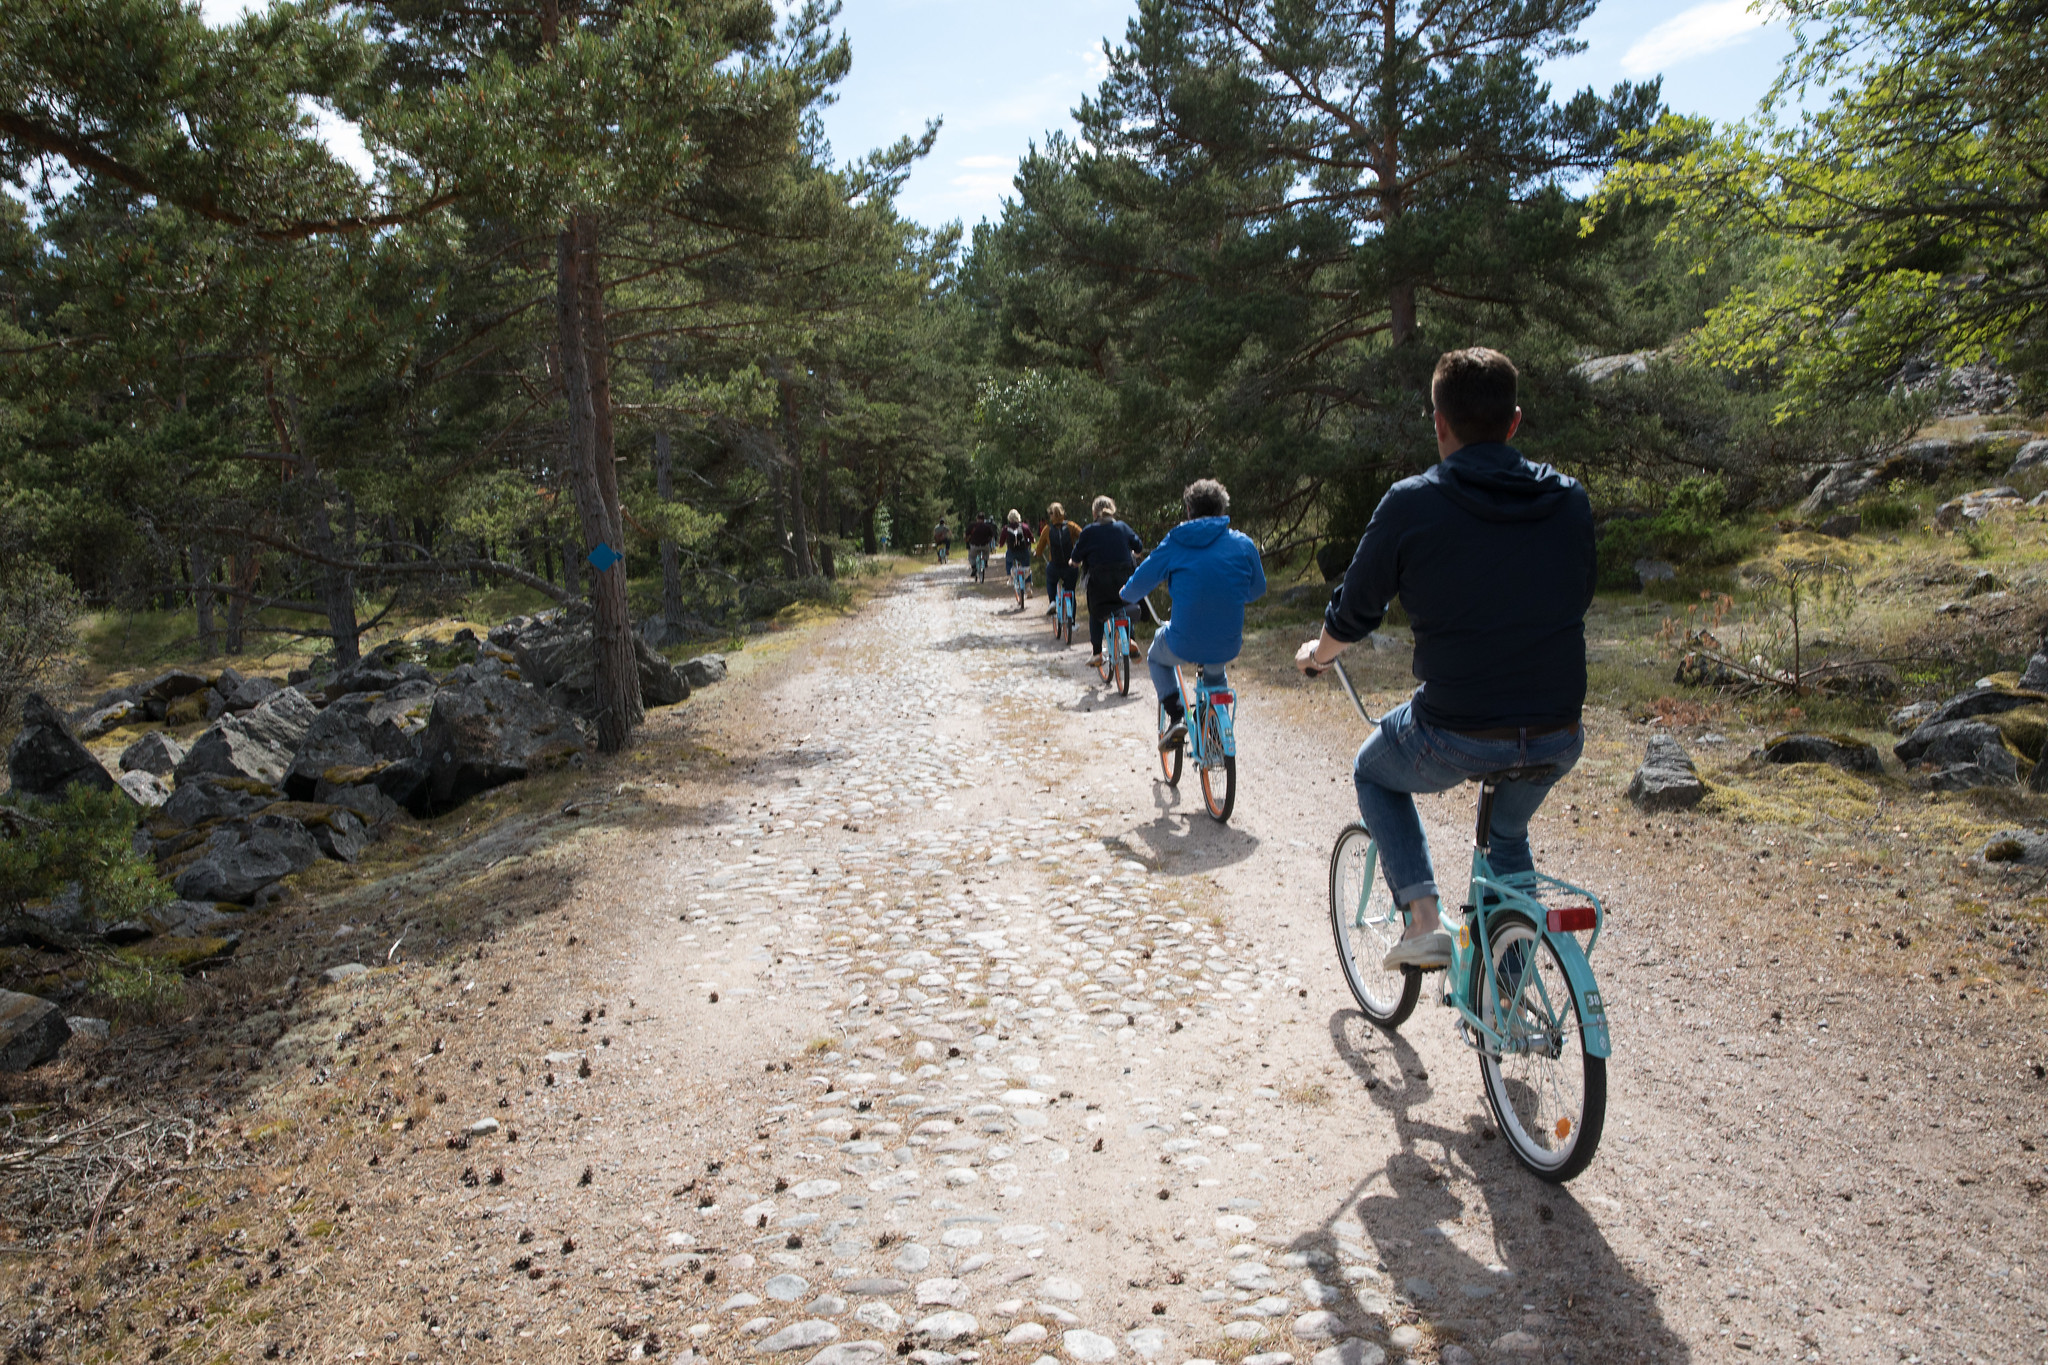 Cyclists on a forest path.